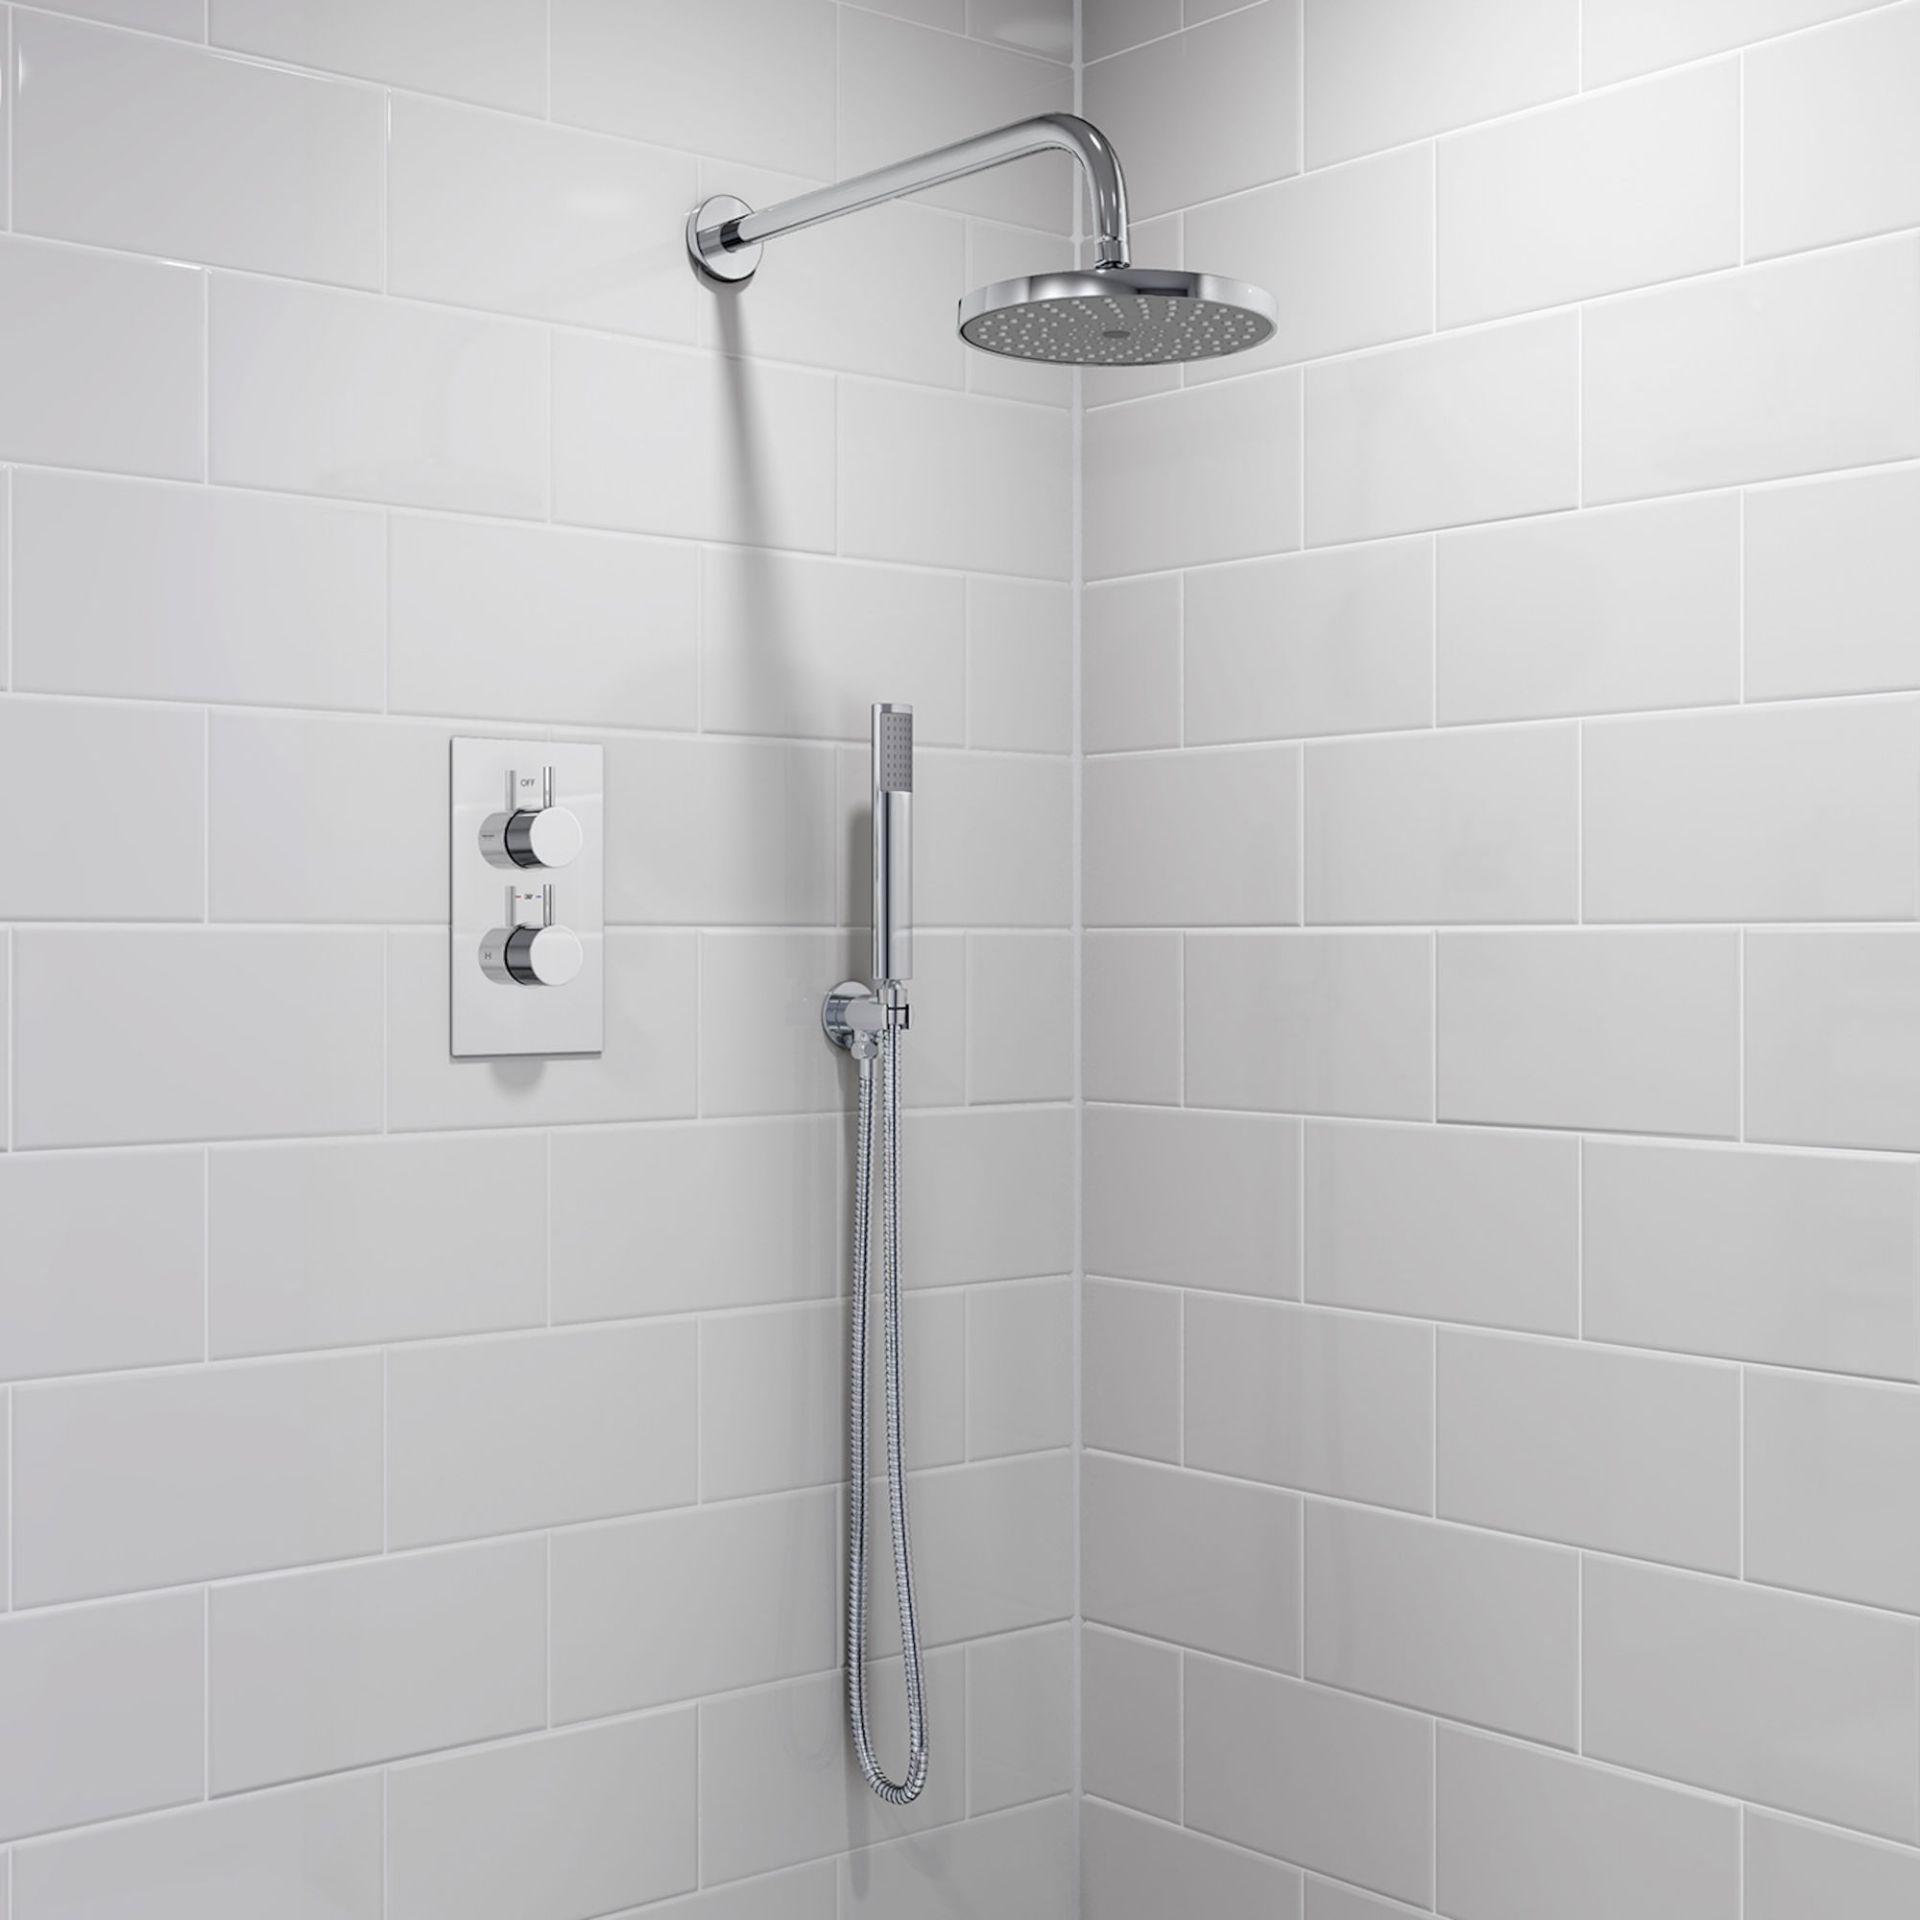 (XS47) Round Concealed Thermostatic Mixer Shower Kit & Medium Head. Family friendly detachable - Image 4 of 5